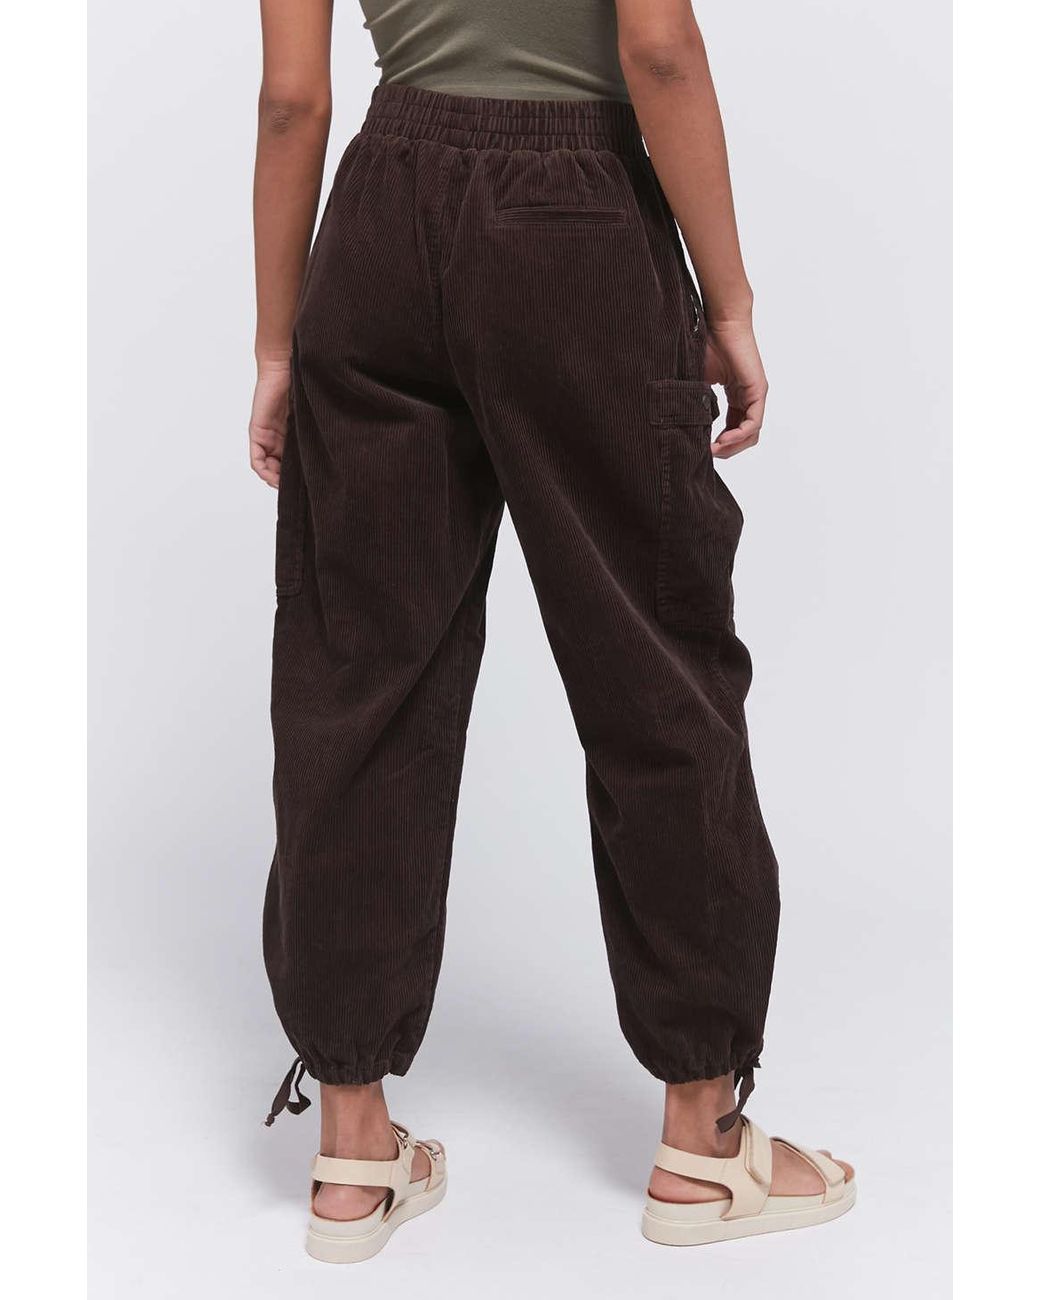 Ripe Encourage Scold Urban Outfitters Uo Vivi Corduroy Cargo Jogger Pant in Black | Lyst